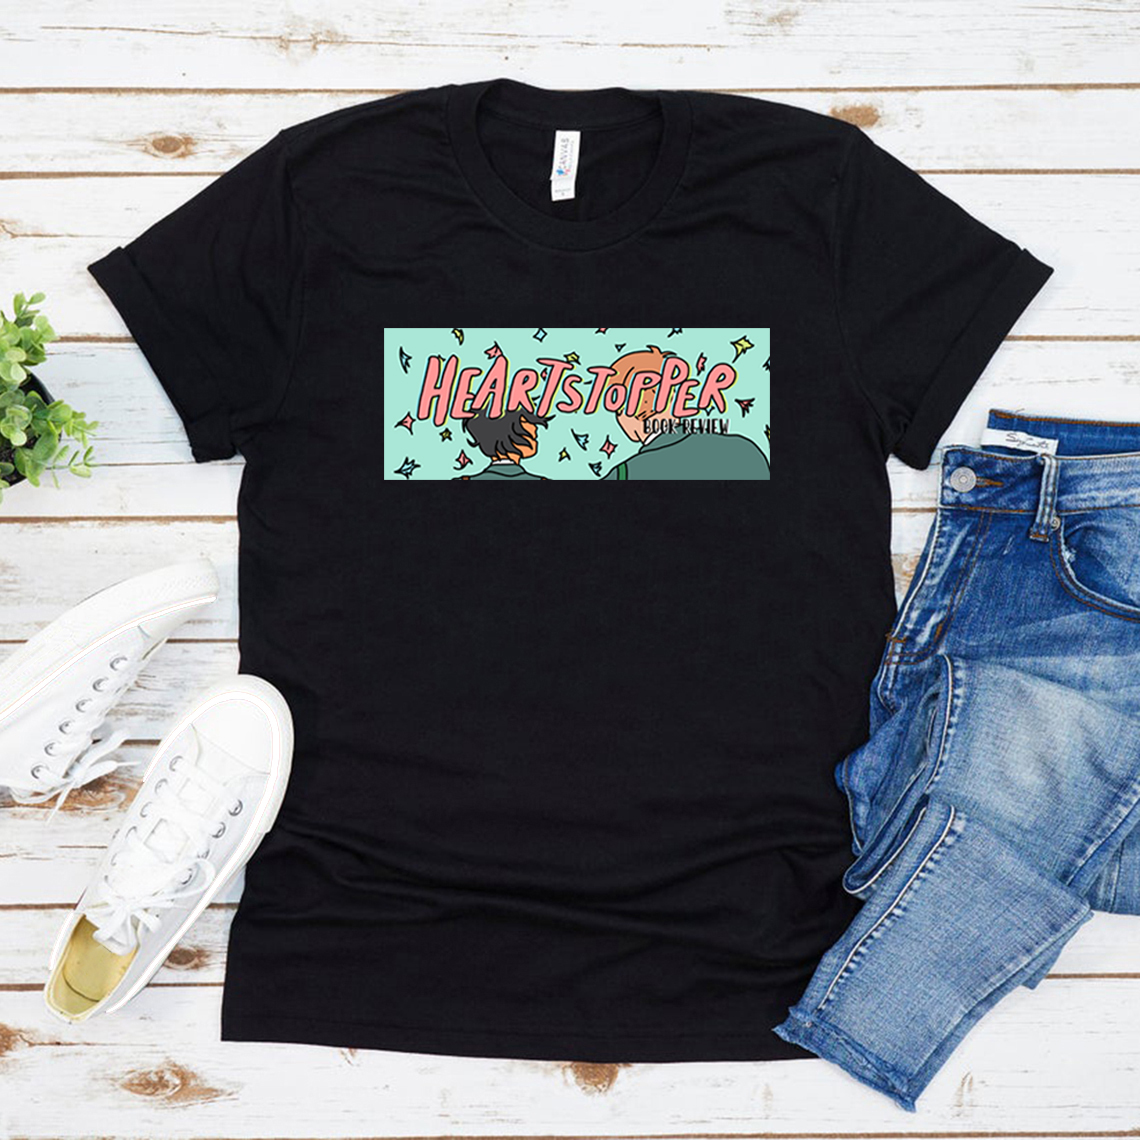 2022 New Heartstopper T Shirt Romance TV Series Nick and Charlie T shirt Short Sleeve Graphic T Shirts Tops Aesthetic Clothes